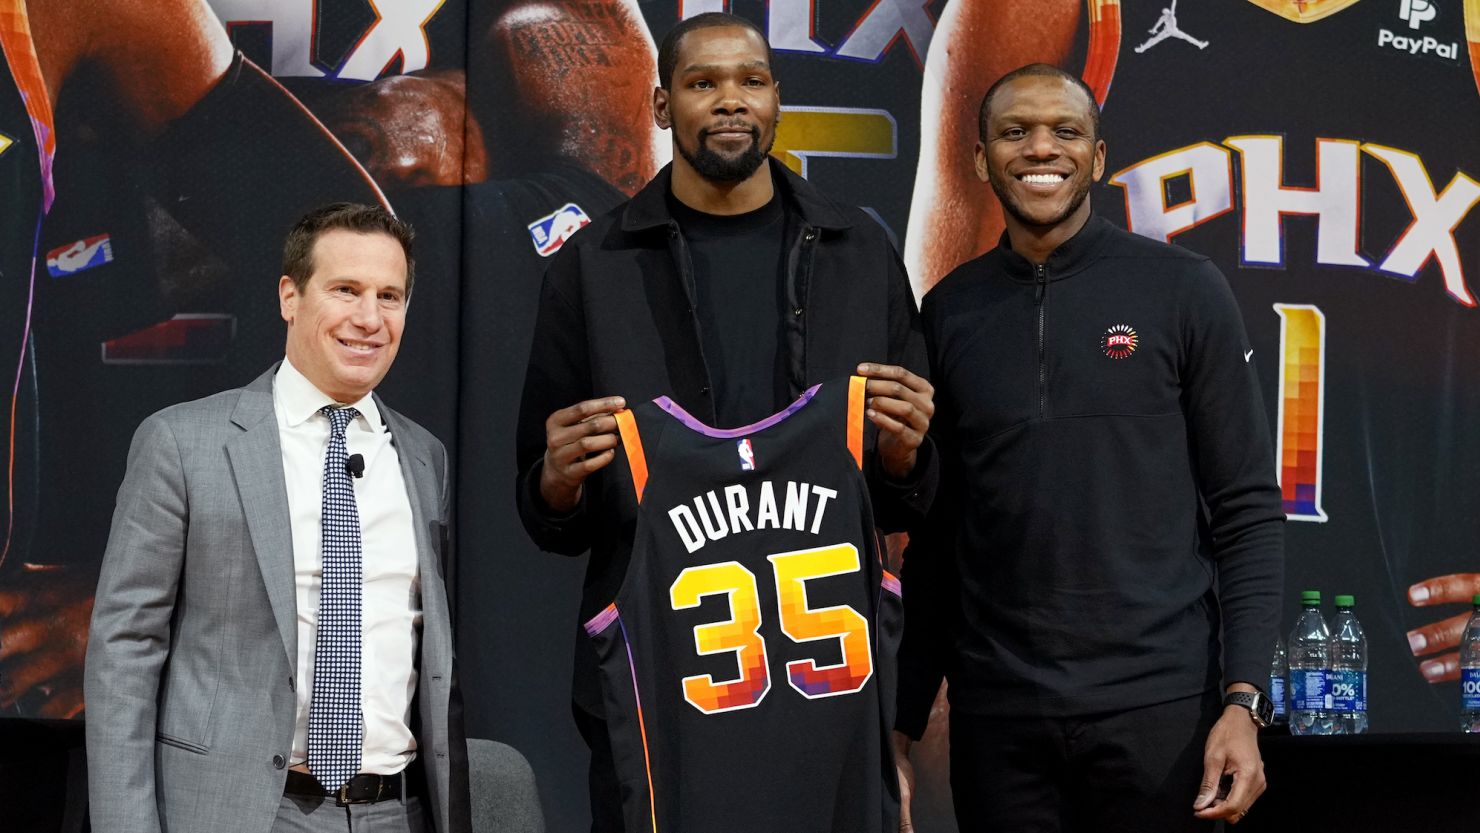 Kevin Durant has praised the Phoenix Suns fans for the warm welcome he has received since arriving.